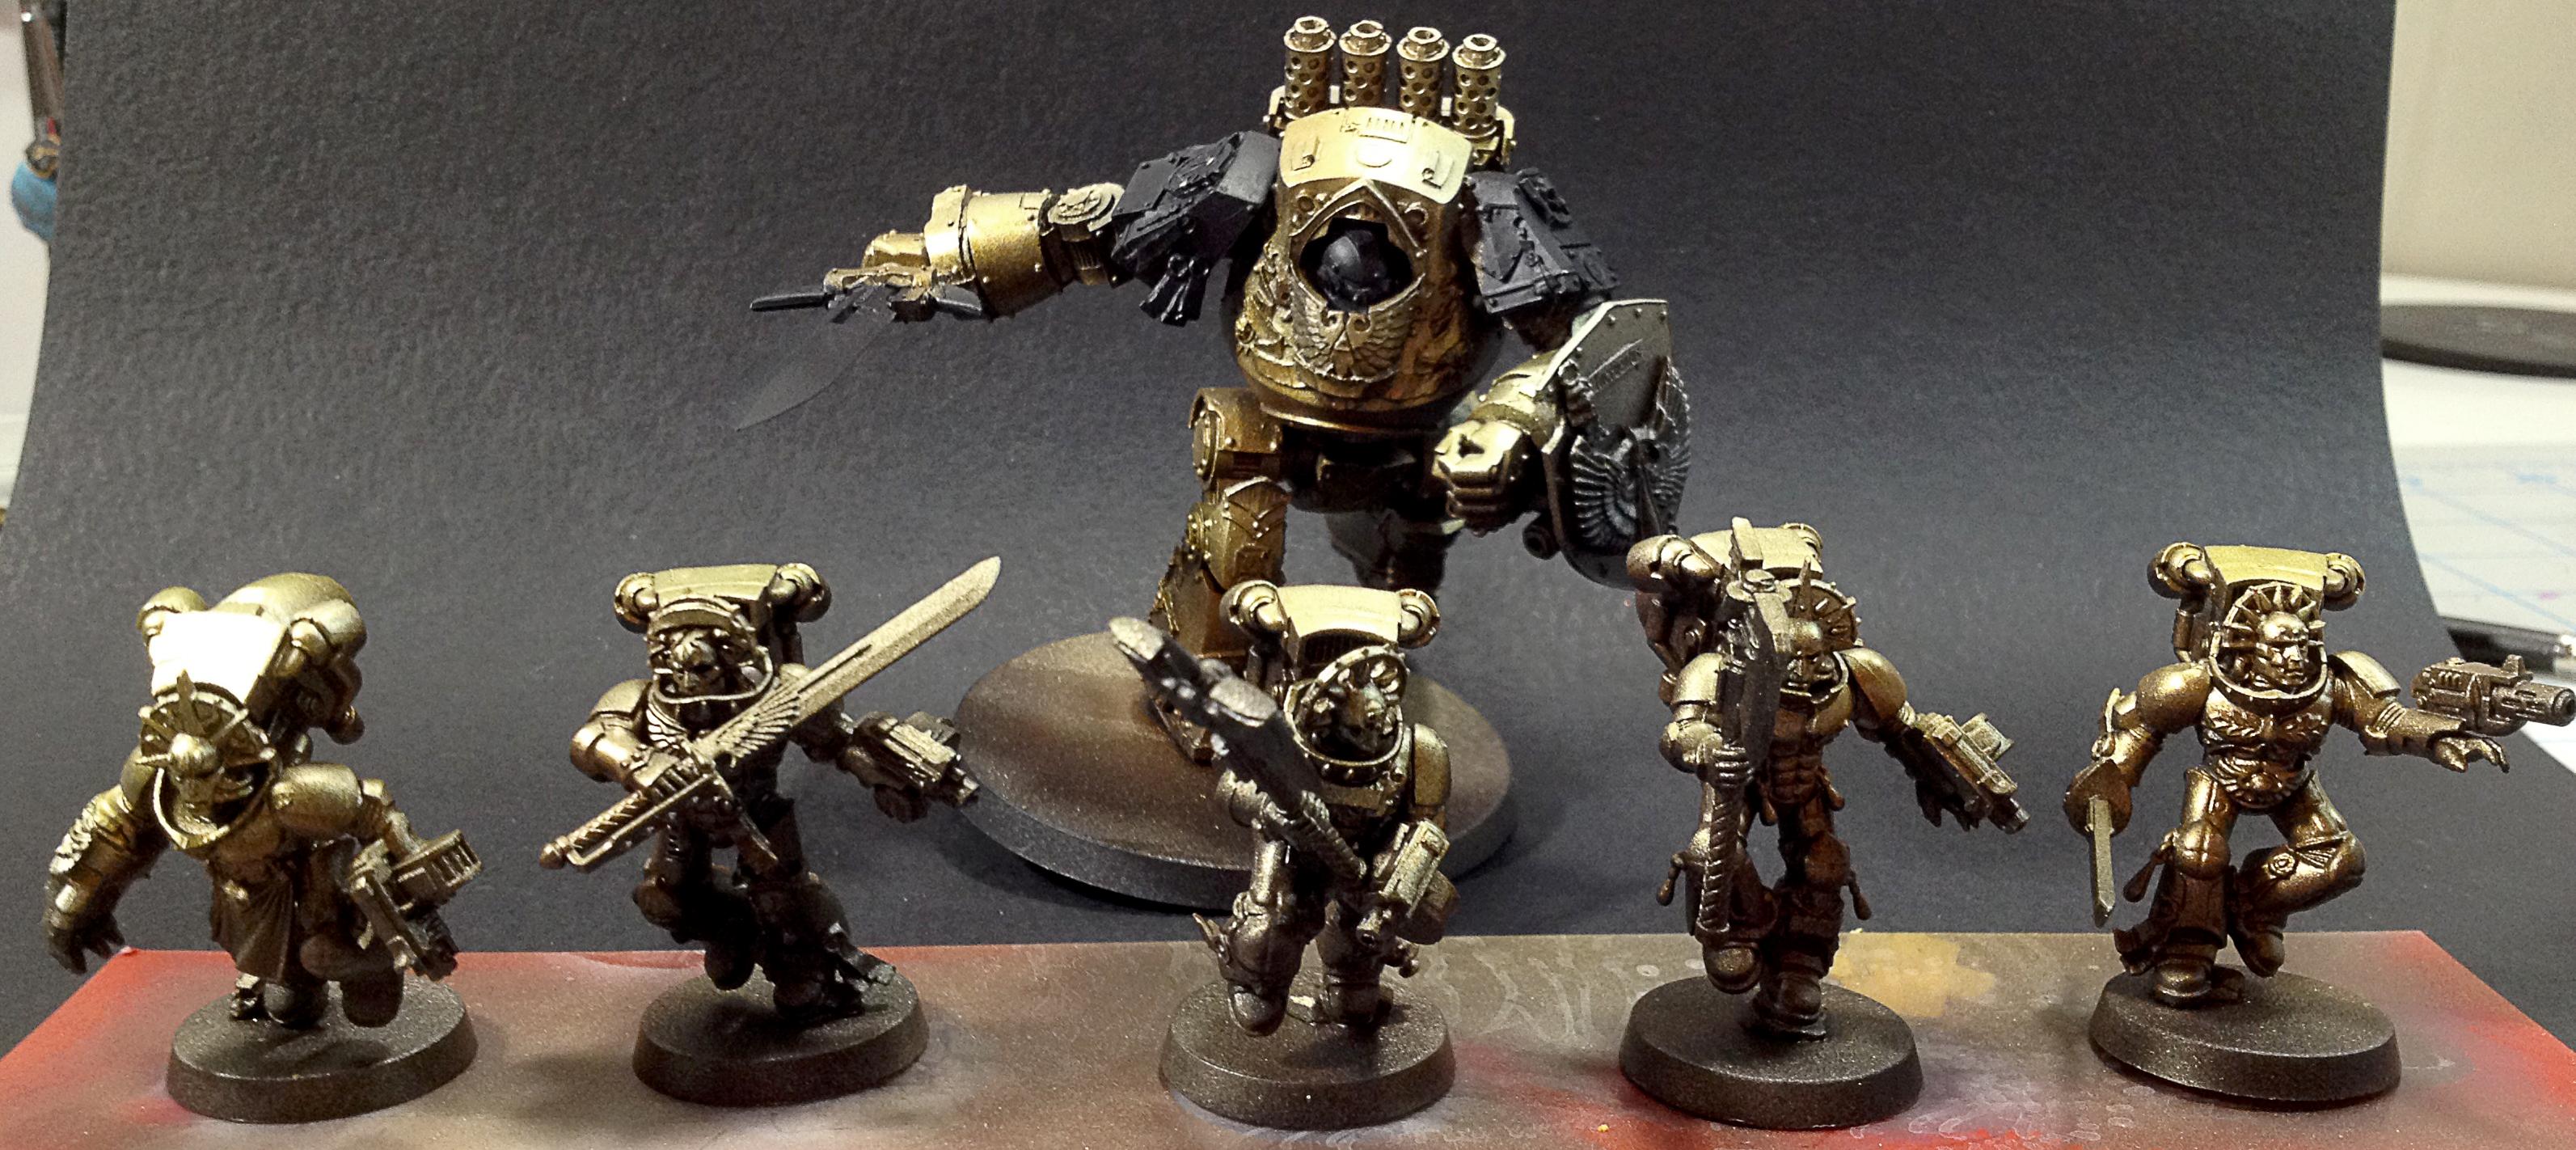 sword and shield contemptor started, zenithal gold, not showing up super well on iphone camera lol, with friends